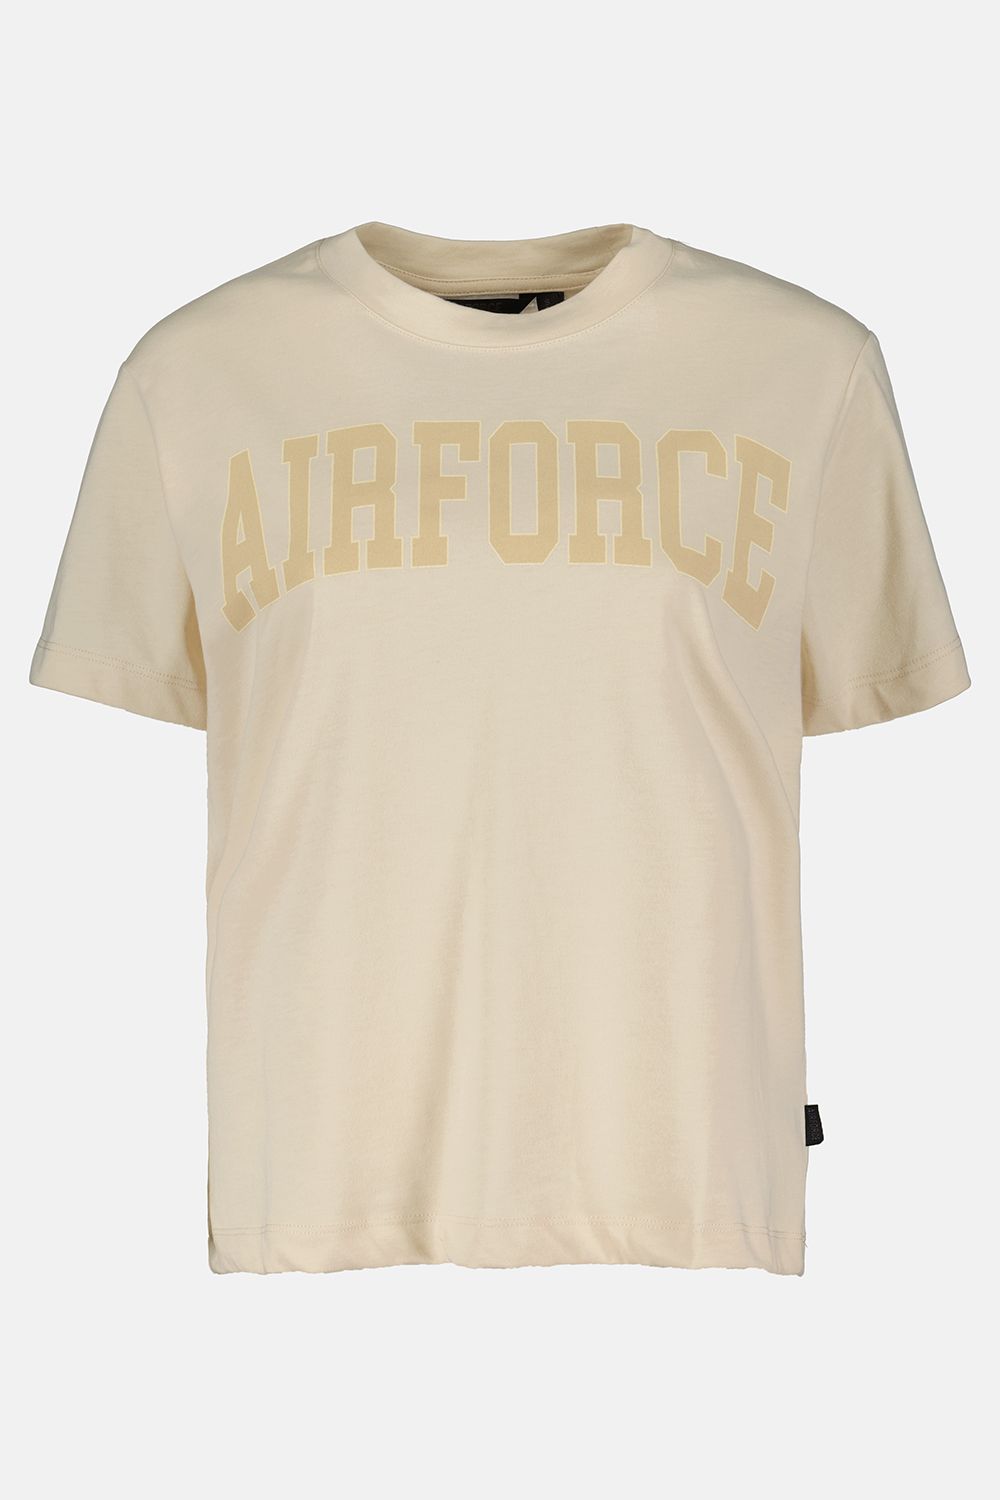 Airforce Womens College T-Shirt